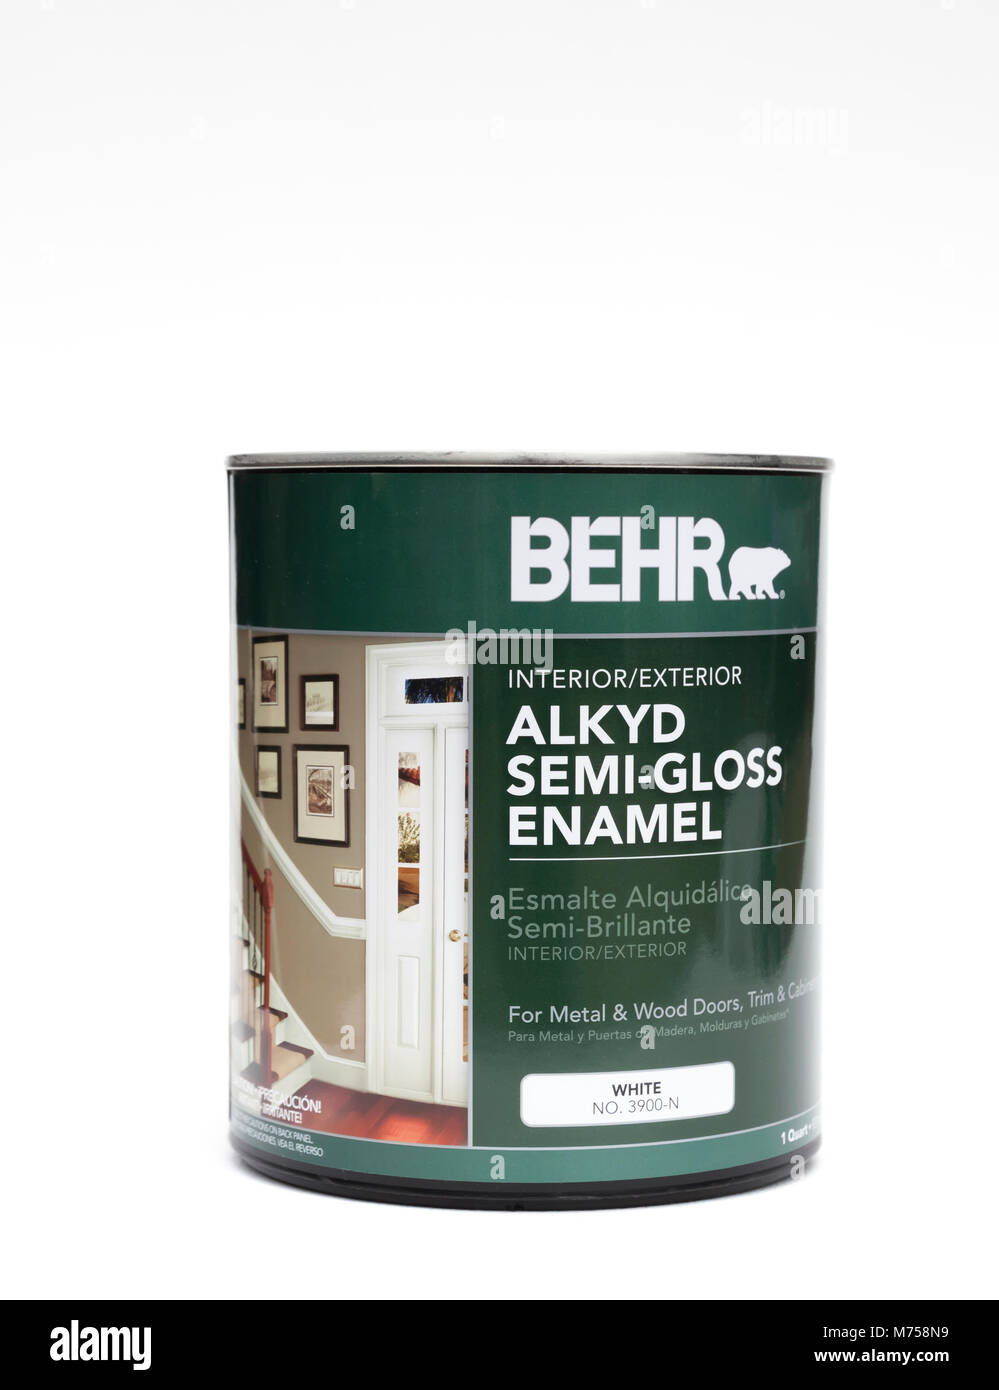 Behr Alkyd Semi-Gloss Enamel Paint for doors, trim, molding, cabinets, wrought iron, etc. Stock Photo